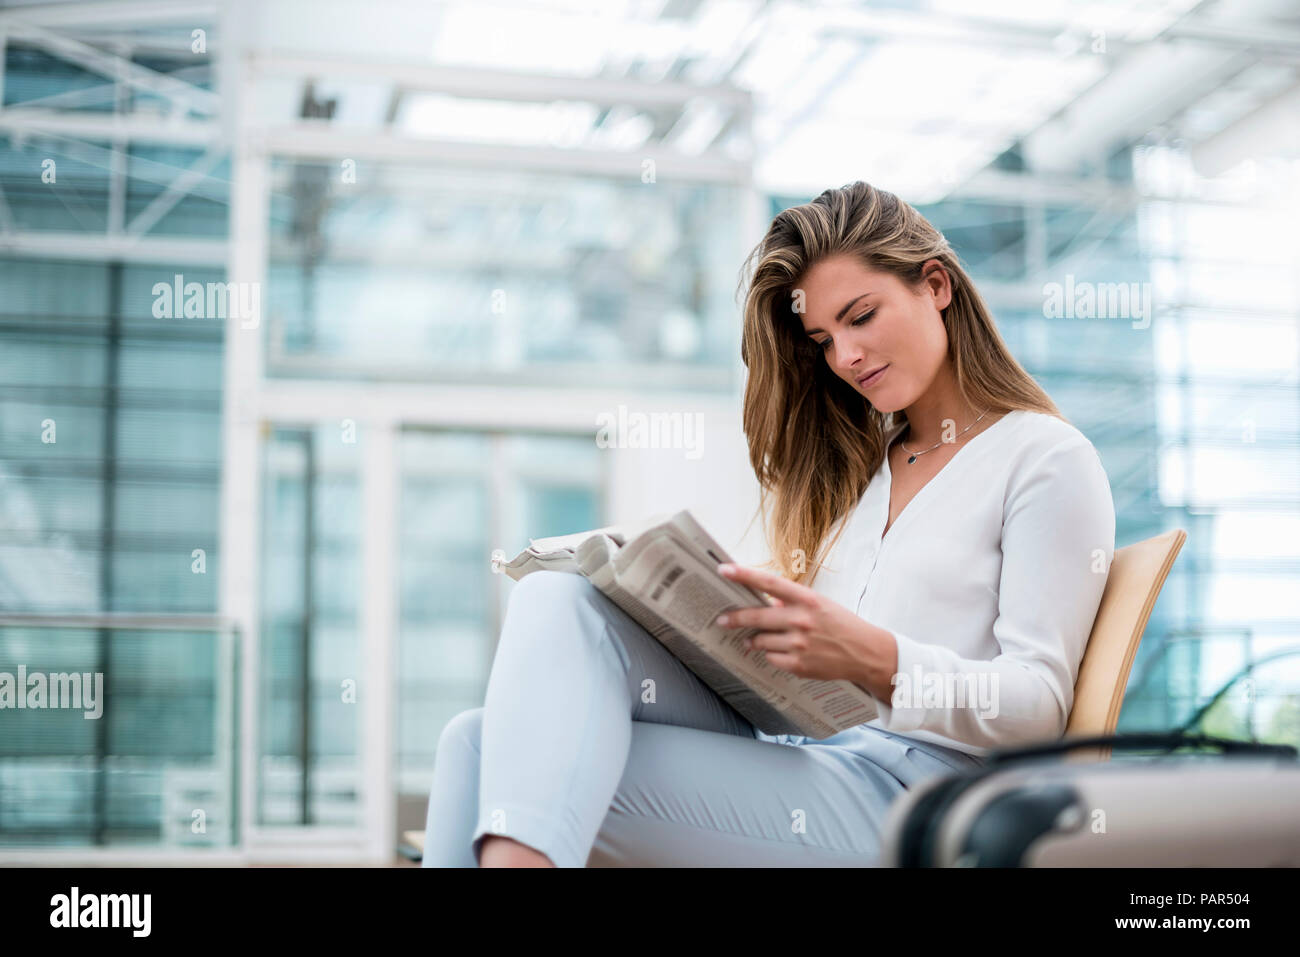 Young businesswoman sitting outdoors with suitcase reading newspaper Stock Photo